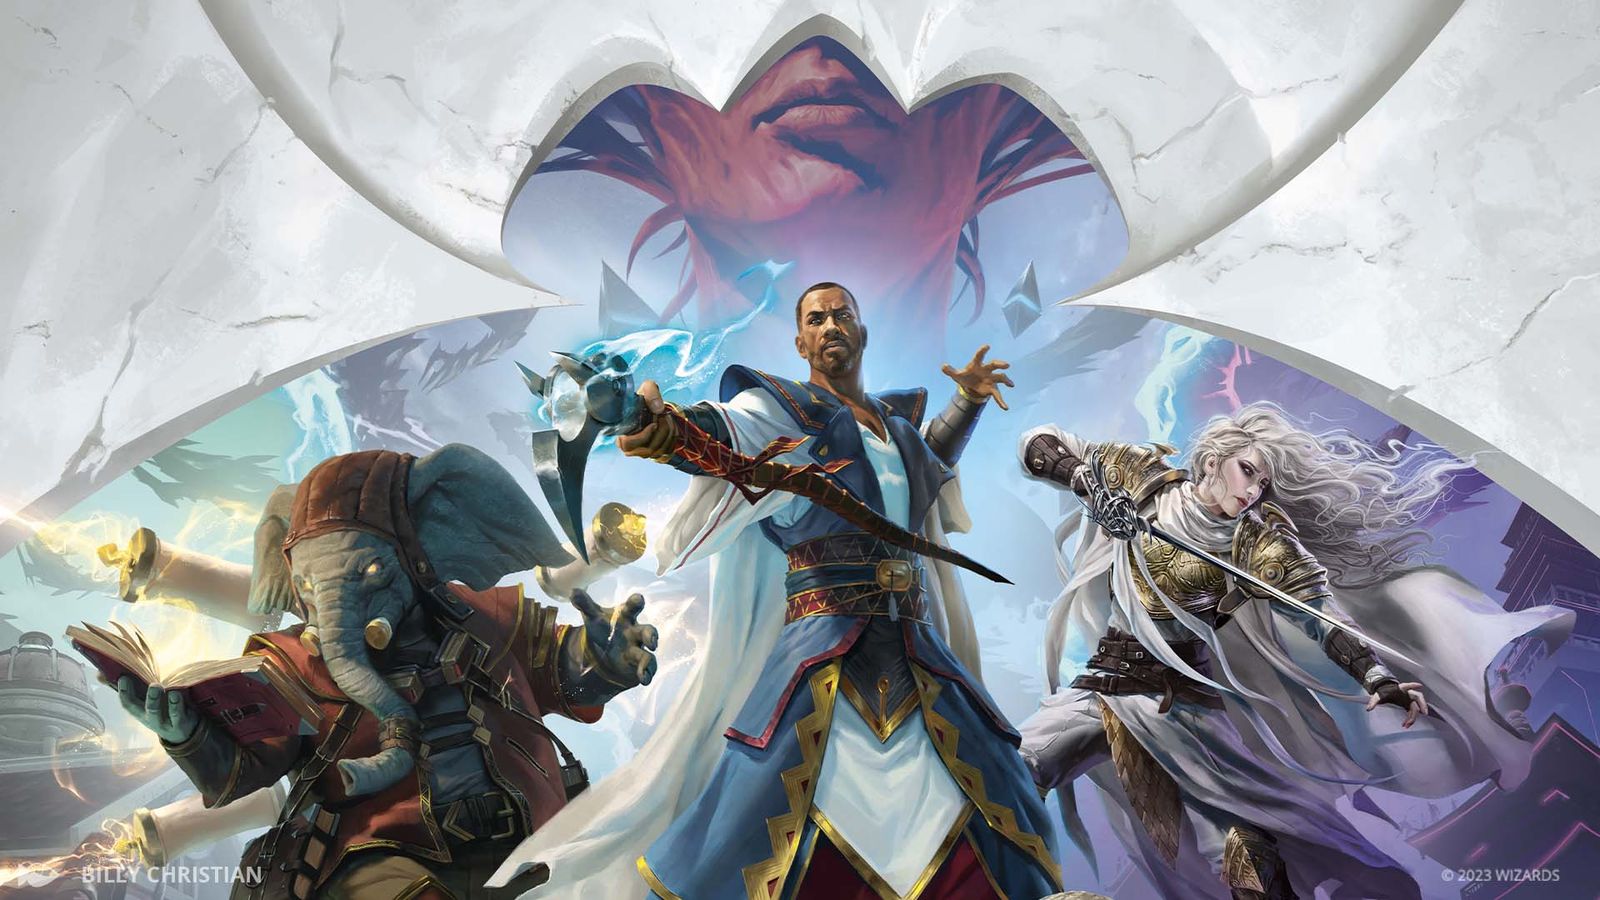 Elesh Norn behind fighters in Magic the Gathering